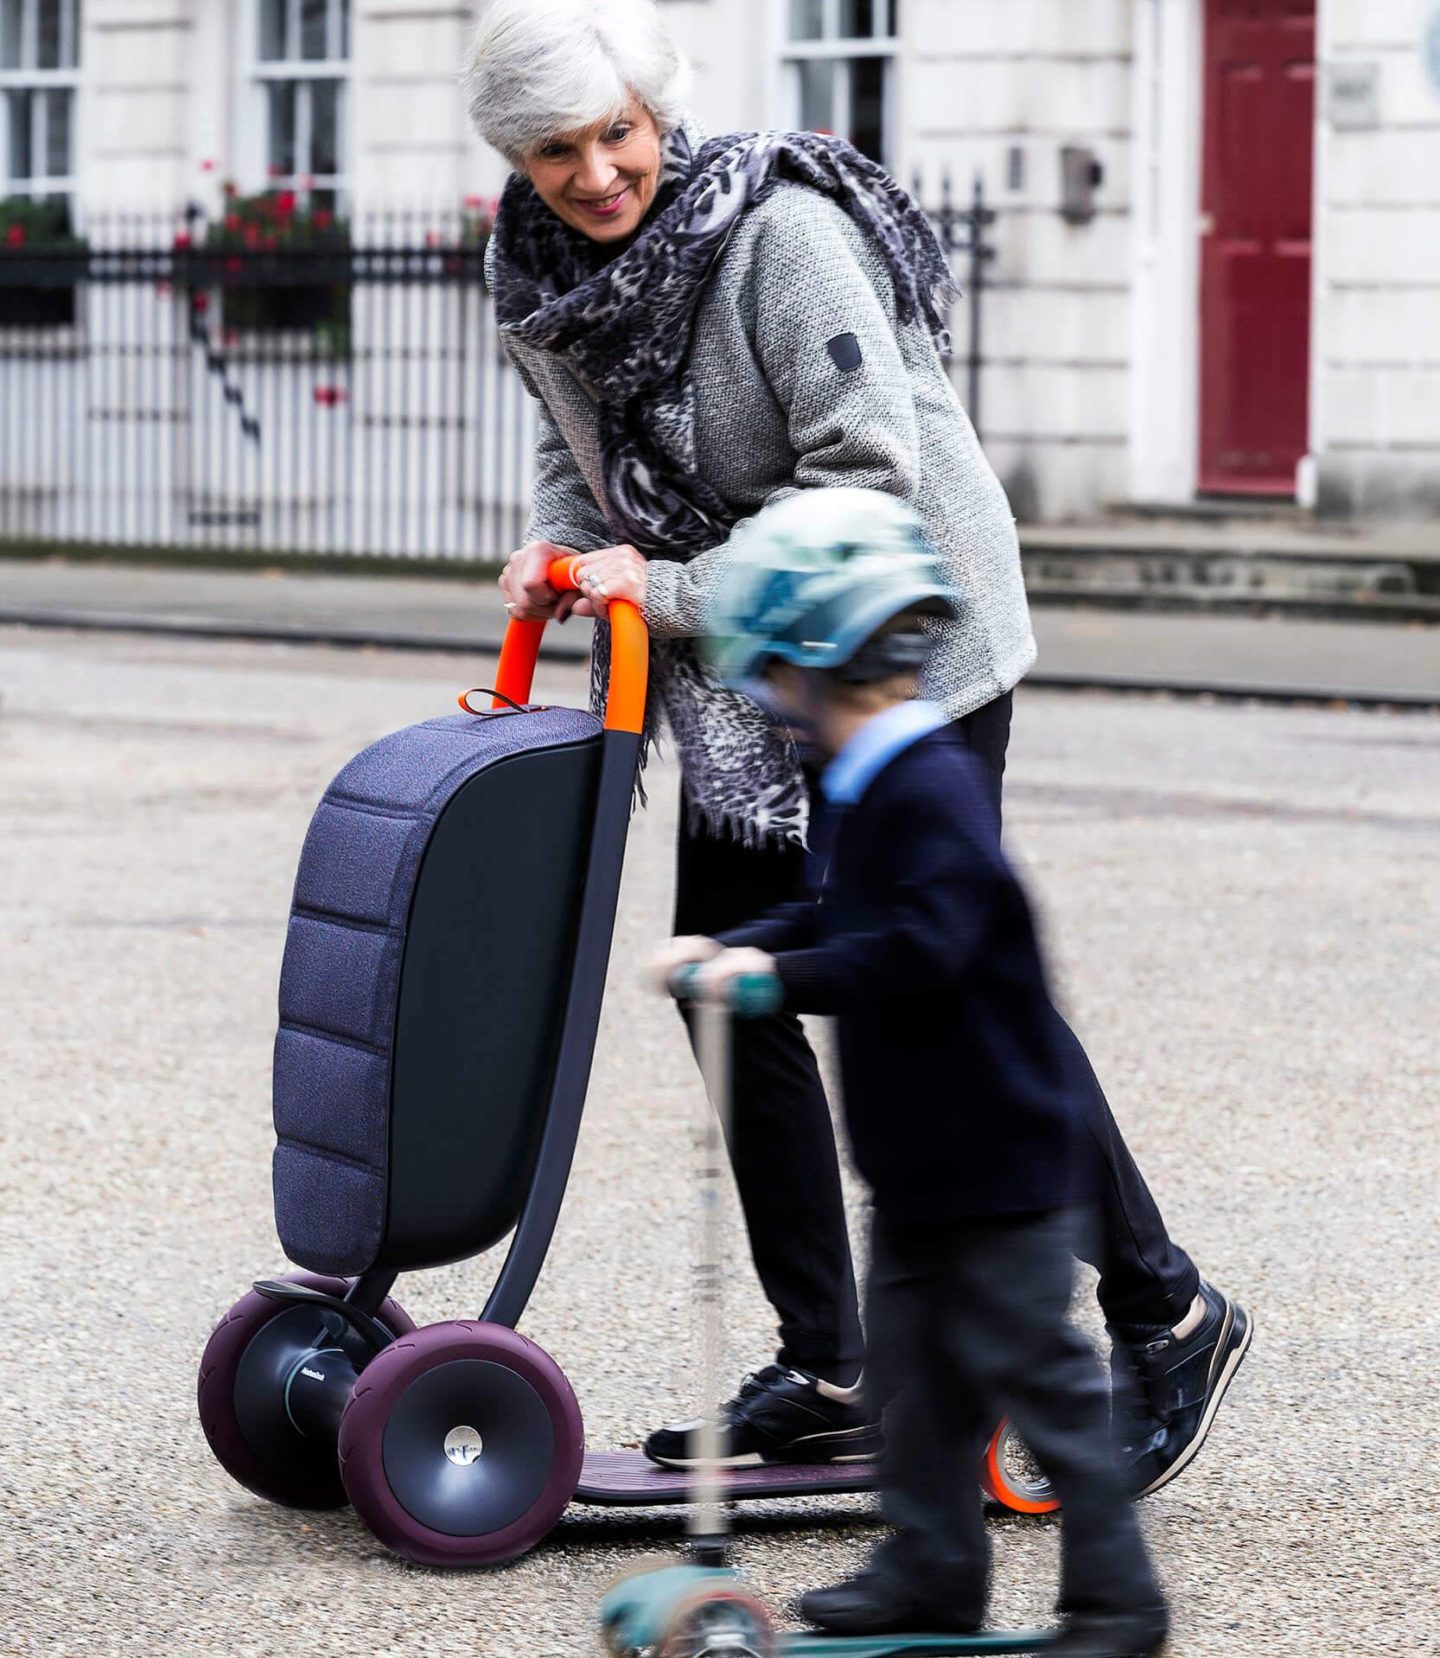 An older woman and a young boy are both riding a personal scooter